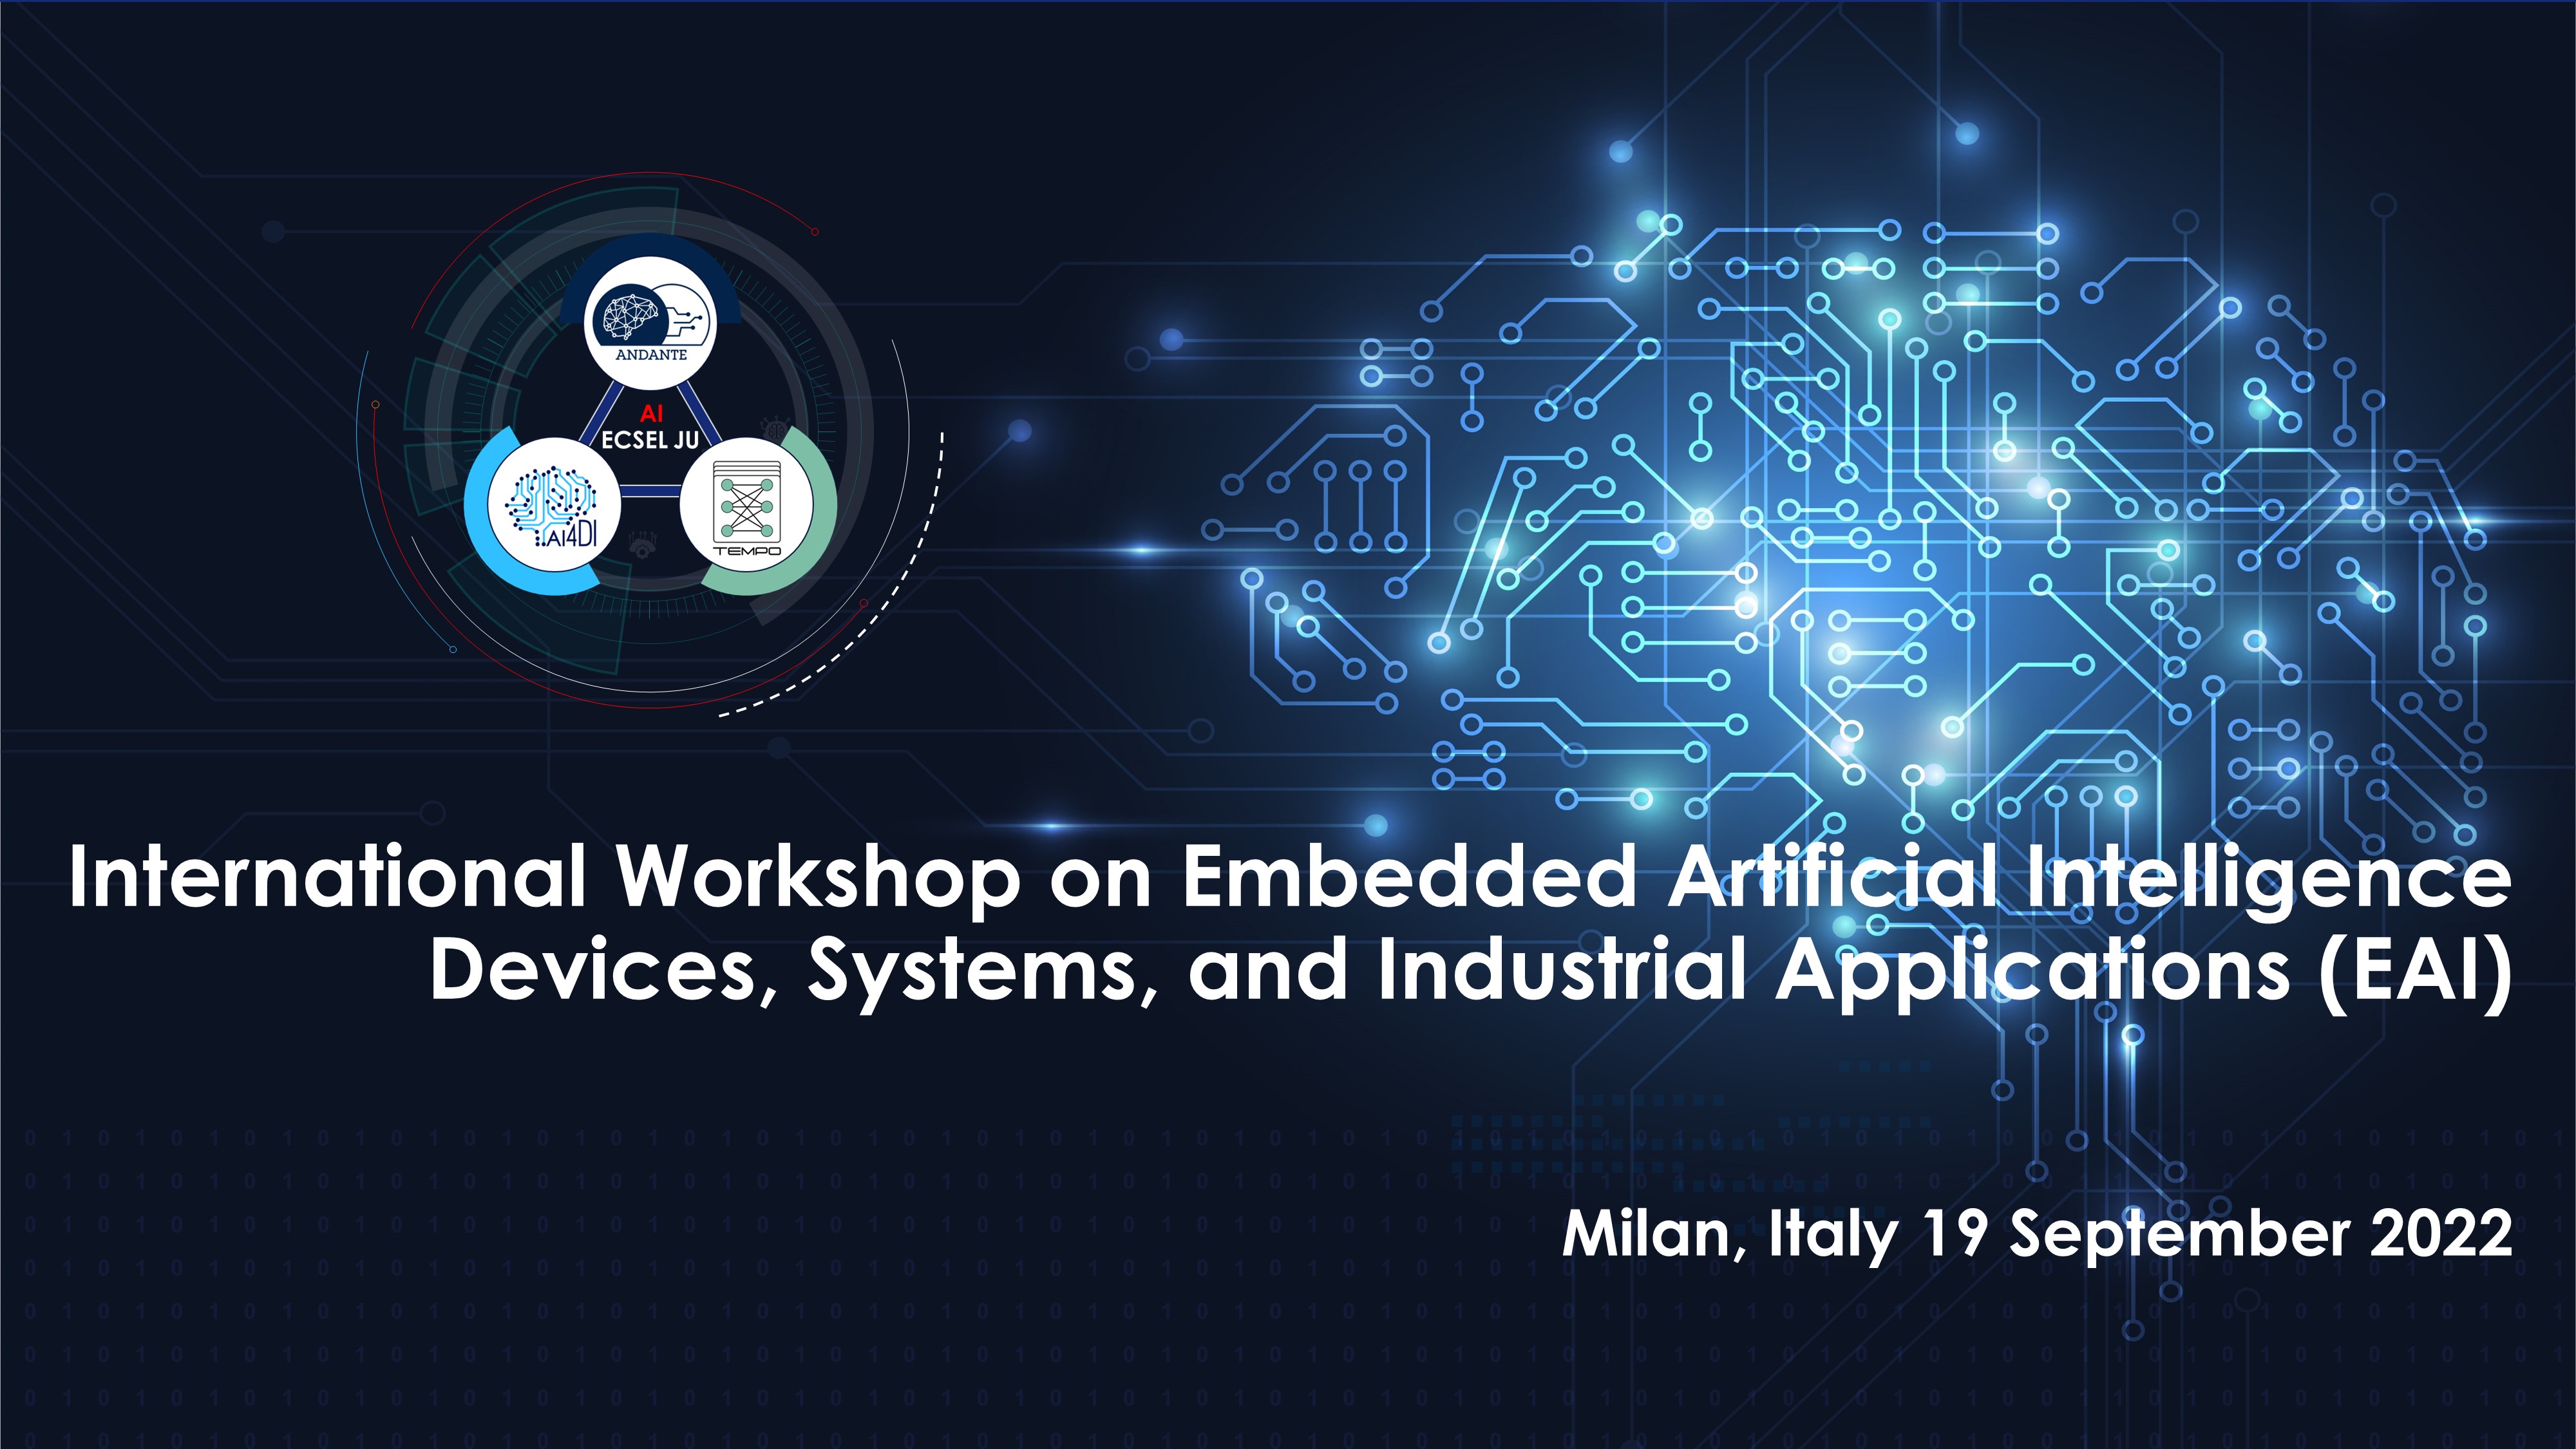 International Workshop on Embedded Artificial Intelligence (EAI) – Devices, Systems, and Industrial Applications 